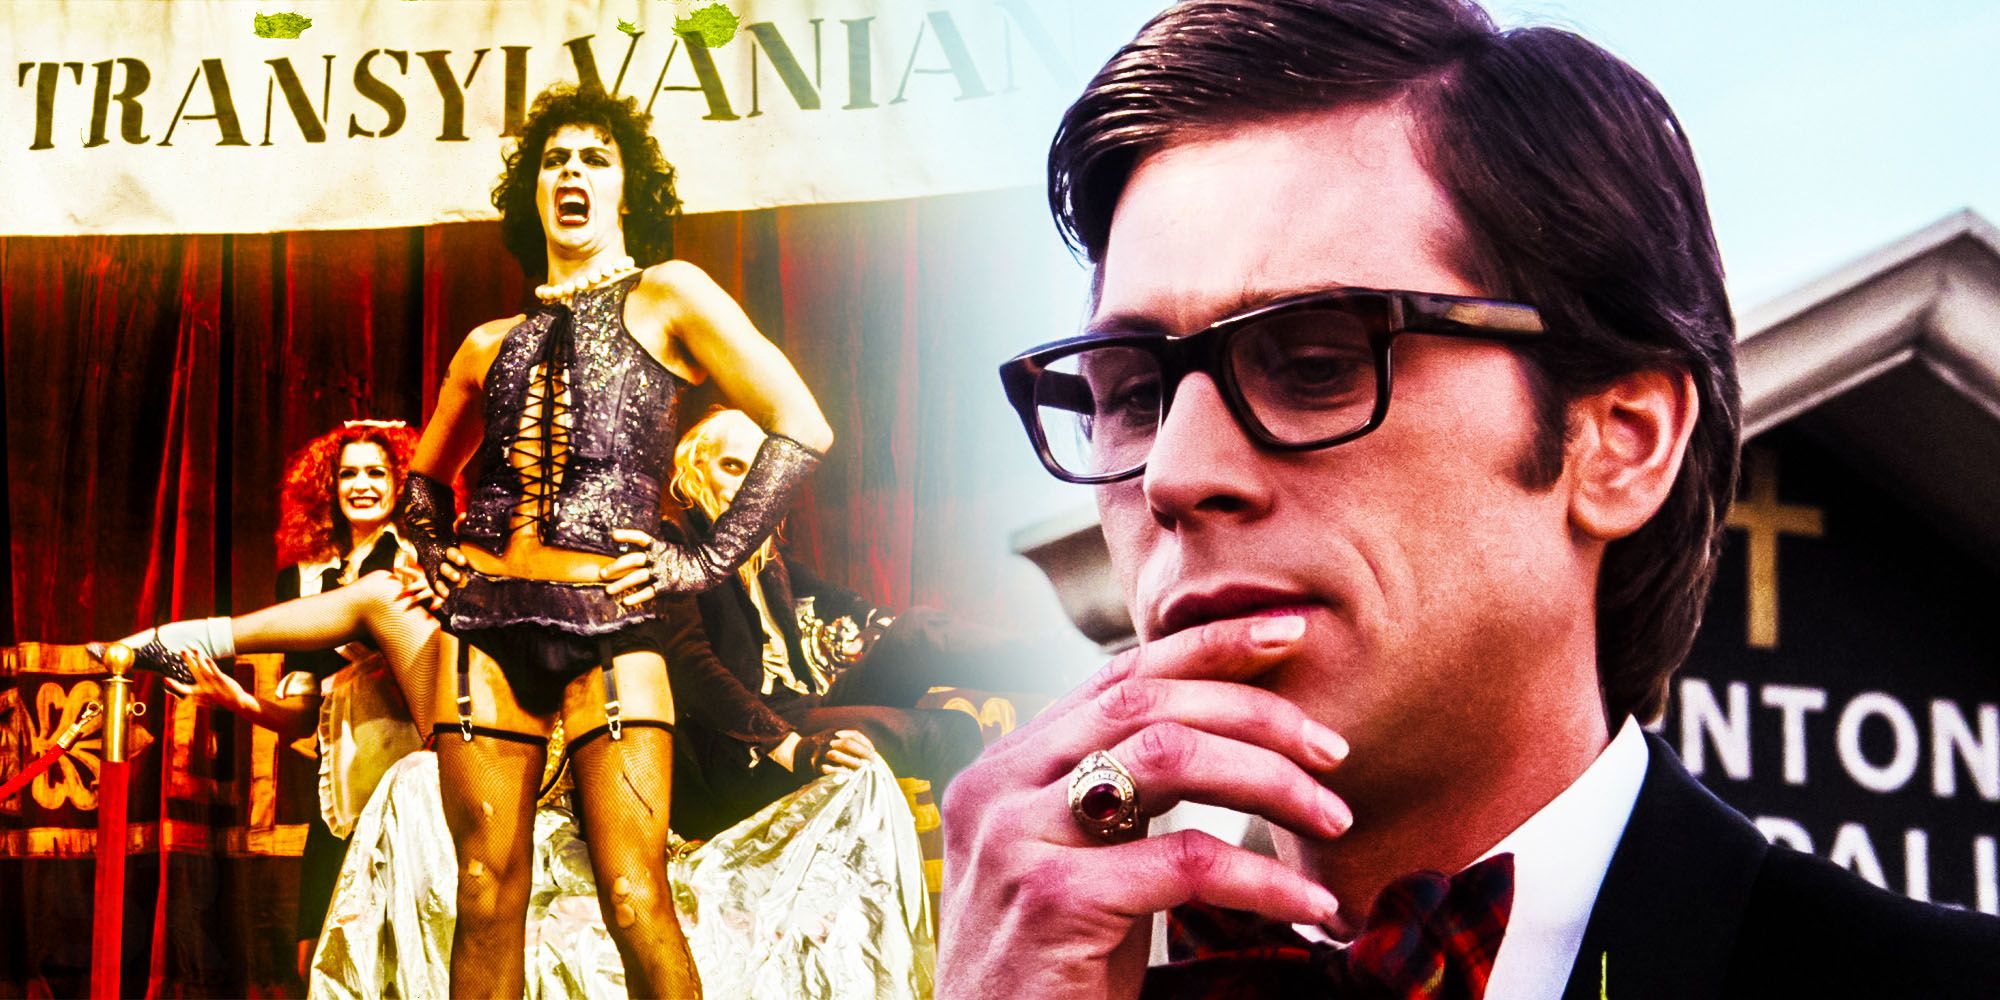 Rocky horror picture show tim curry